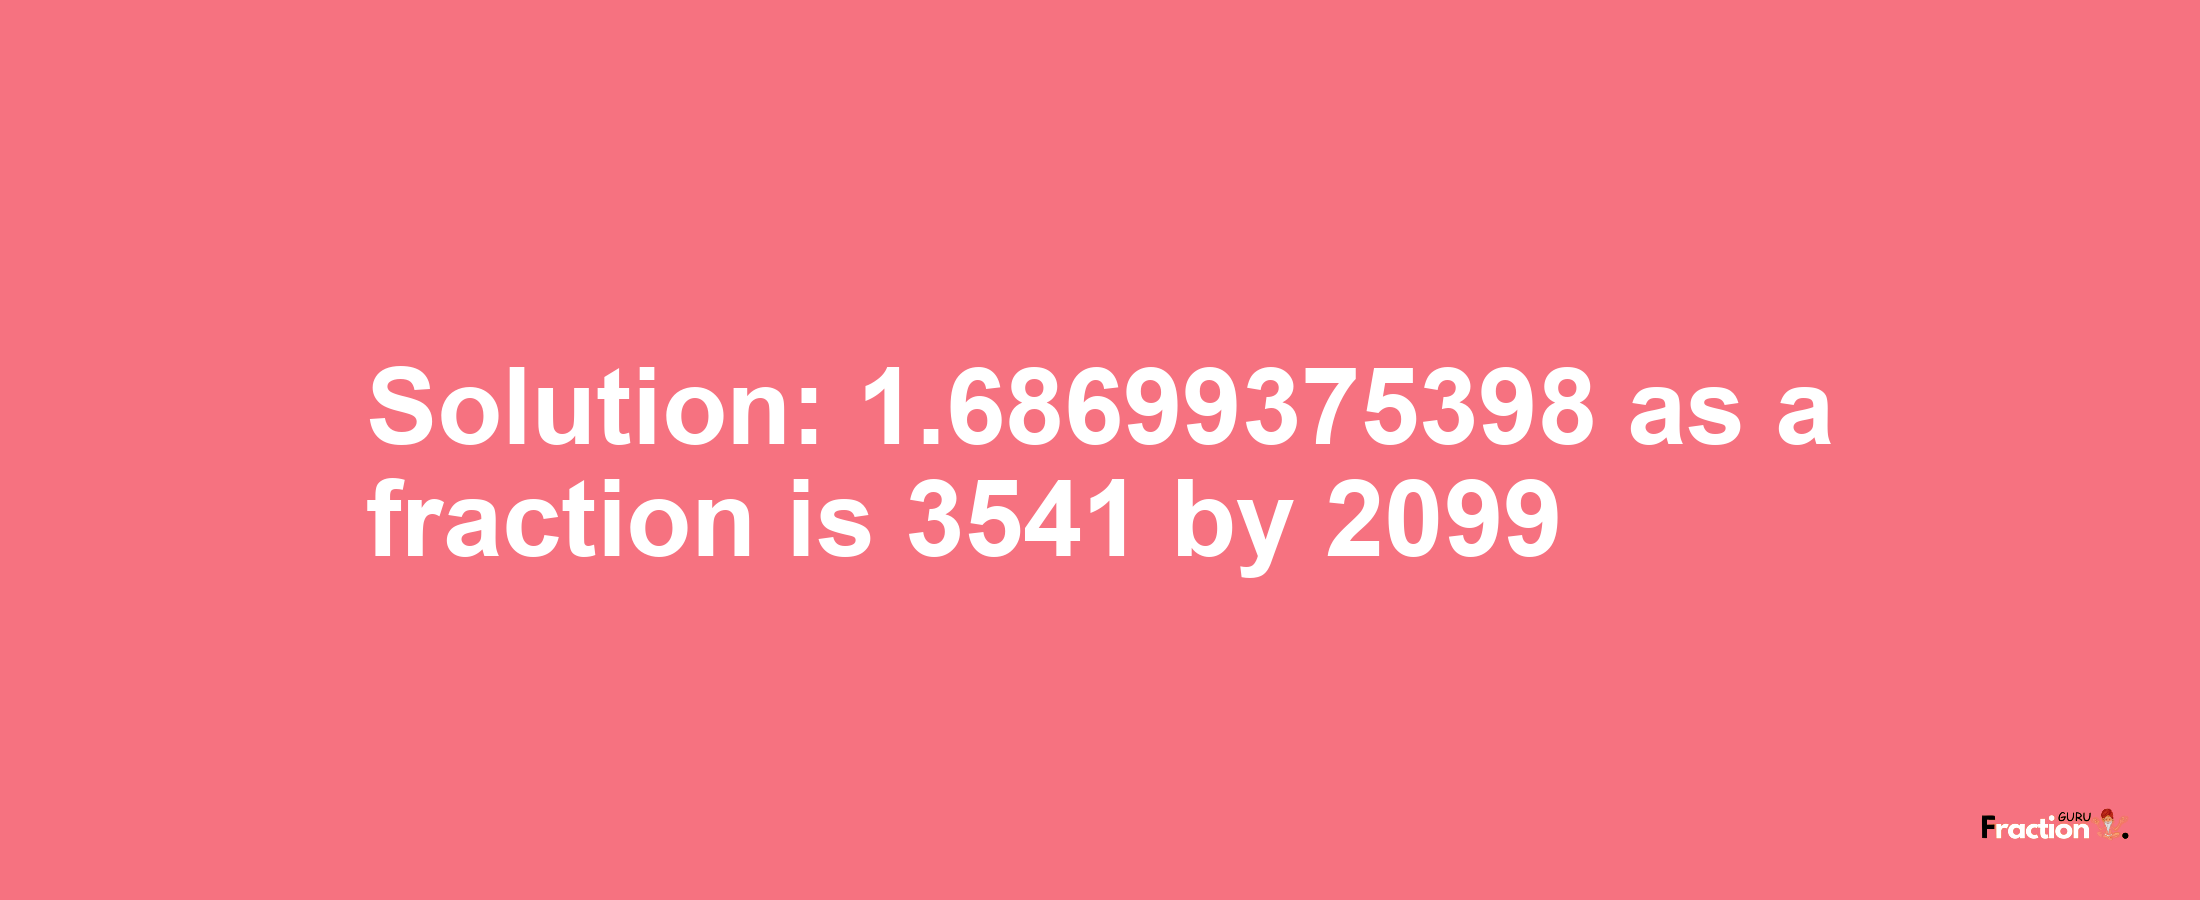 Solution:1.68699375398 as a fraction is 3541/2099